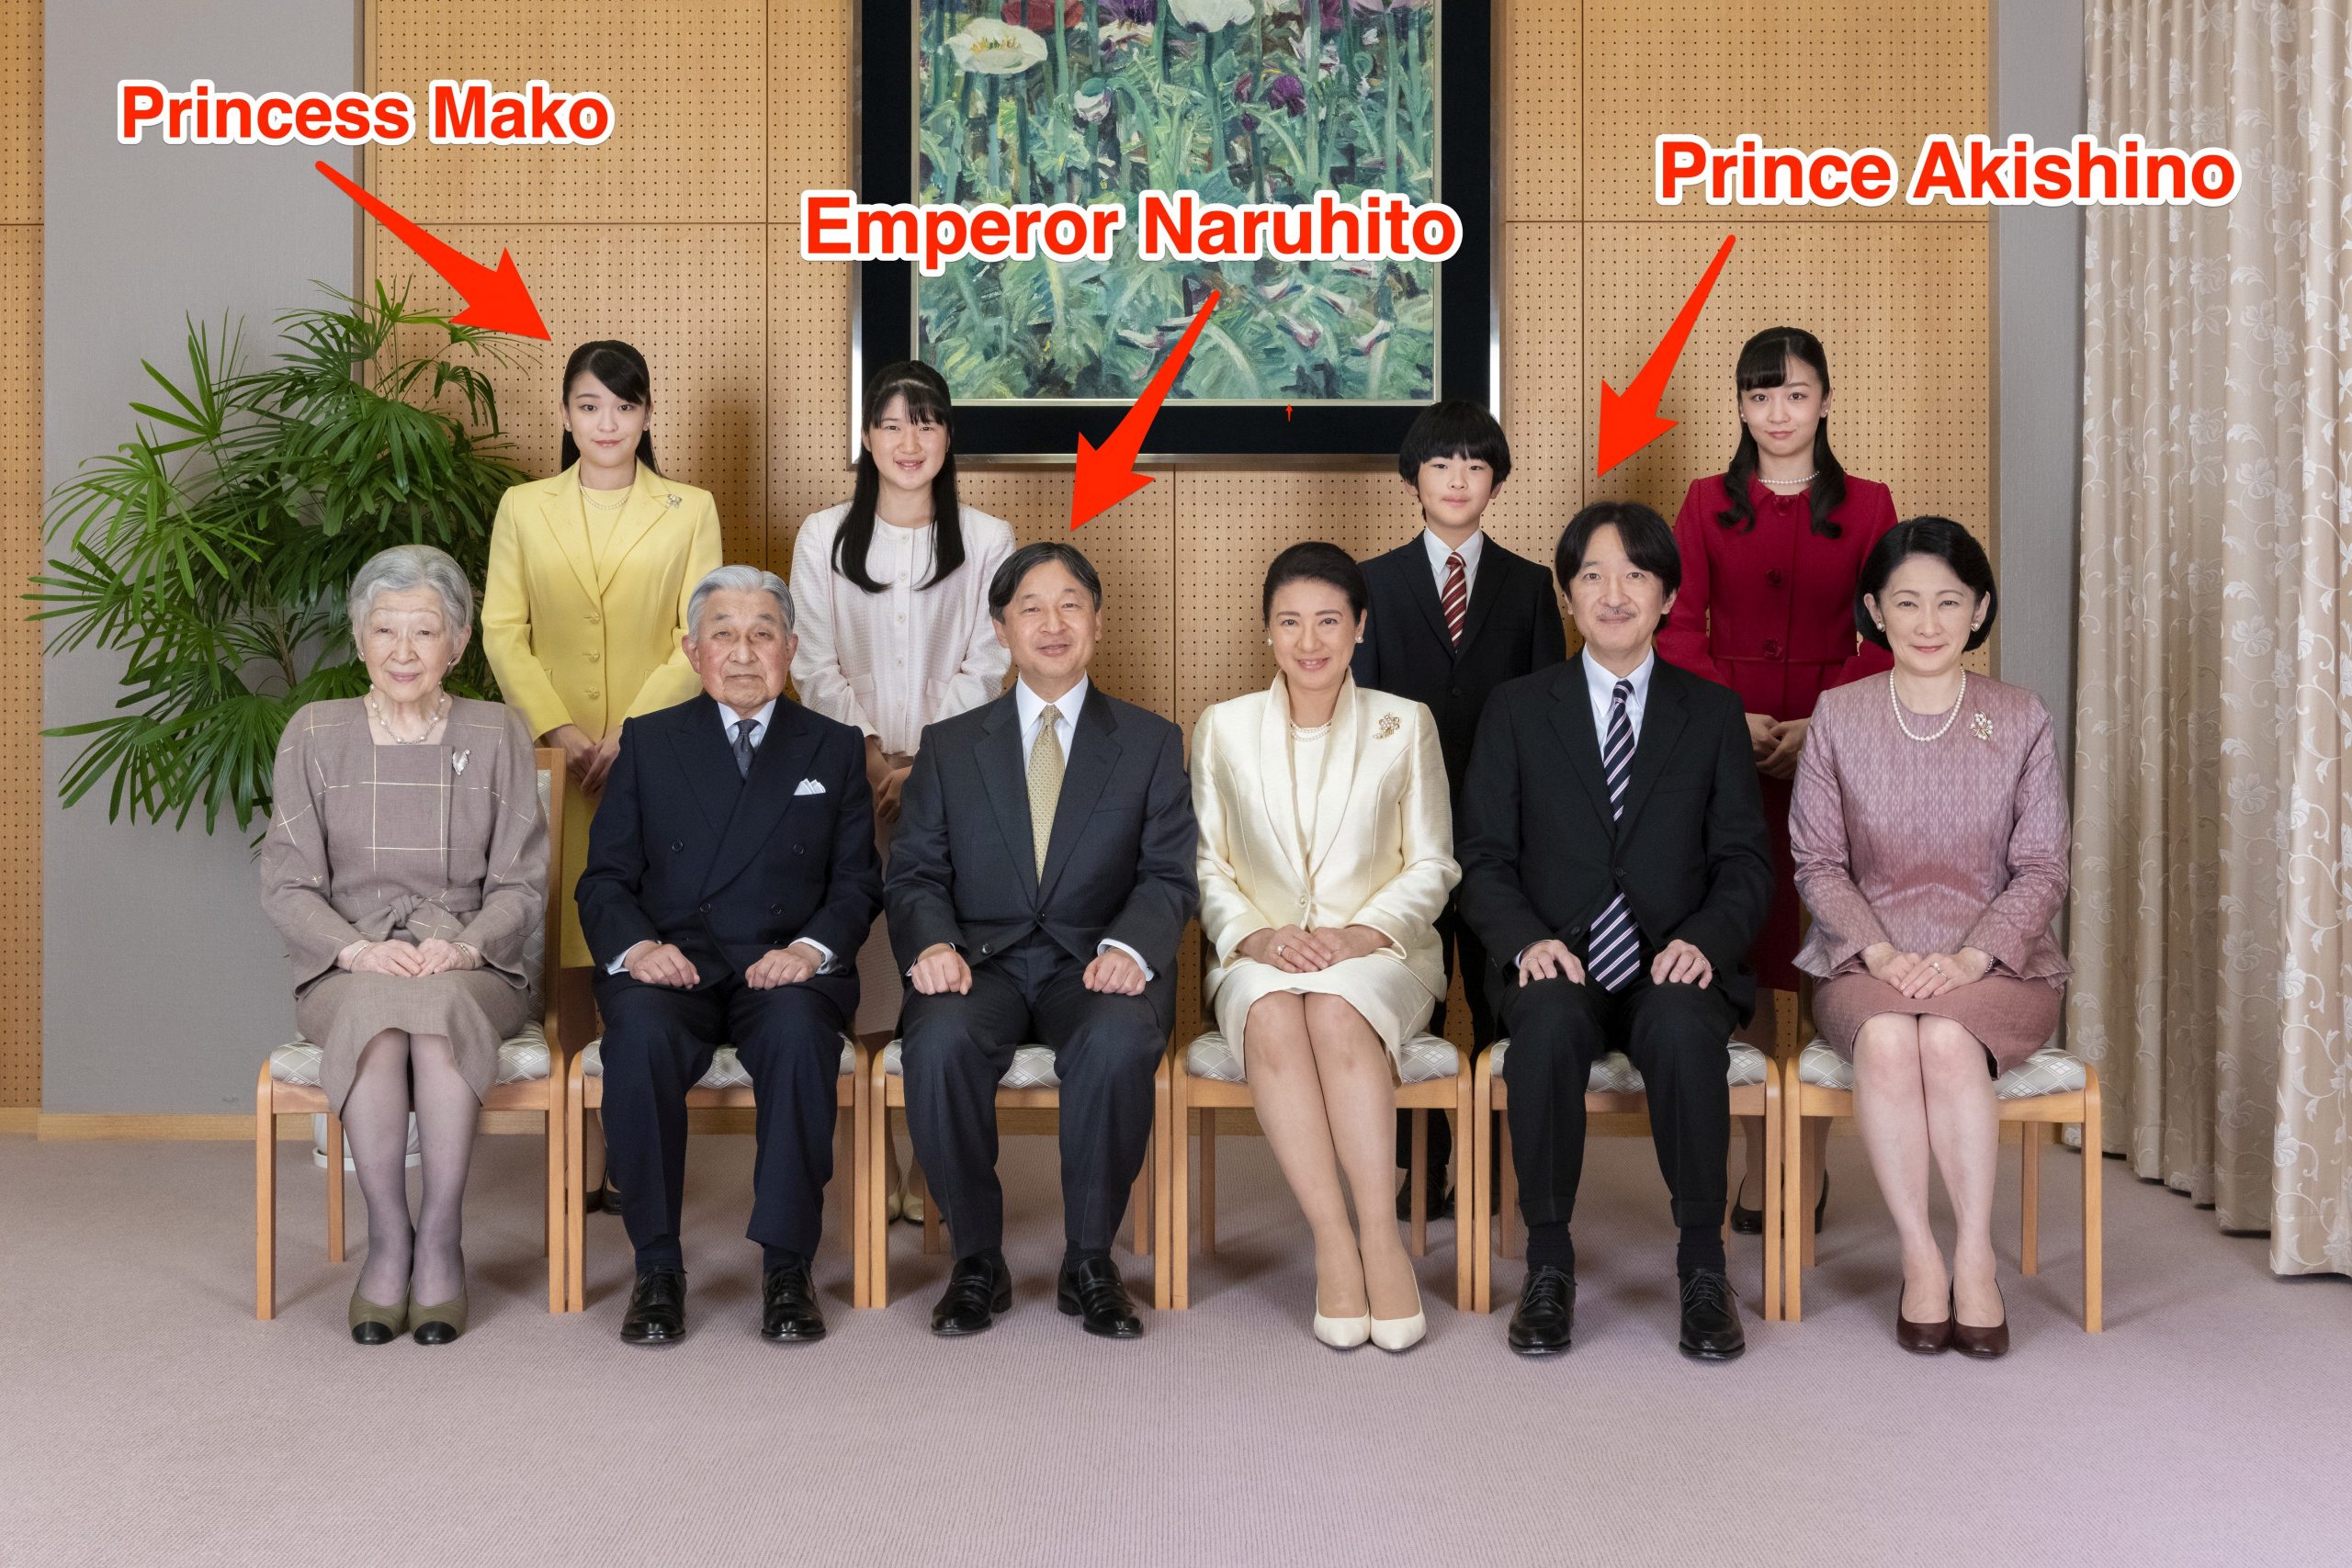 Princess Mako (top left) pictured with her royal family including Emperor Naruhito (third from the left) and her father Prince Akishino (second from the right).